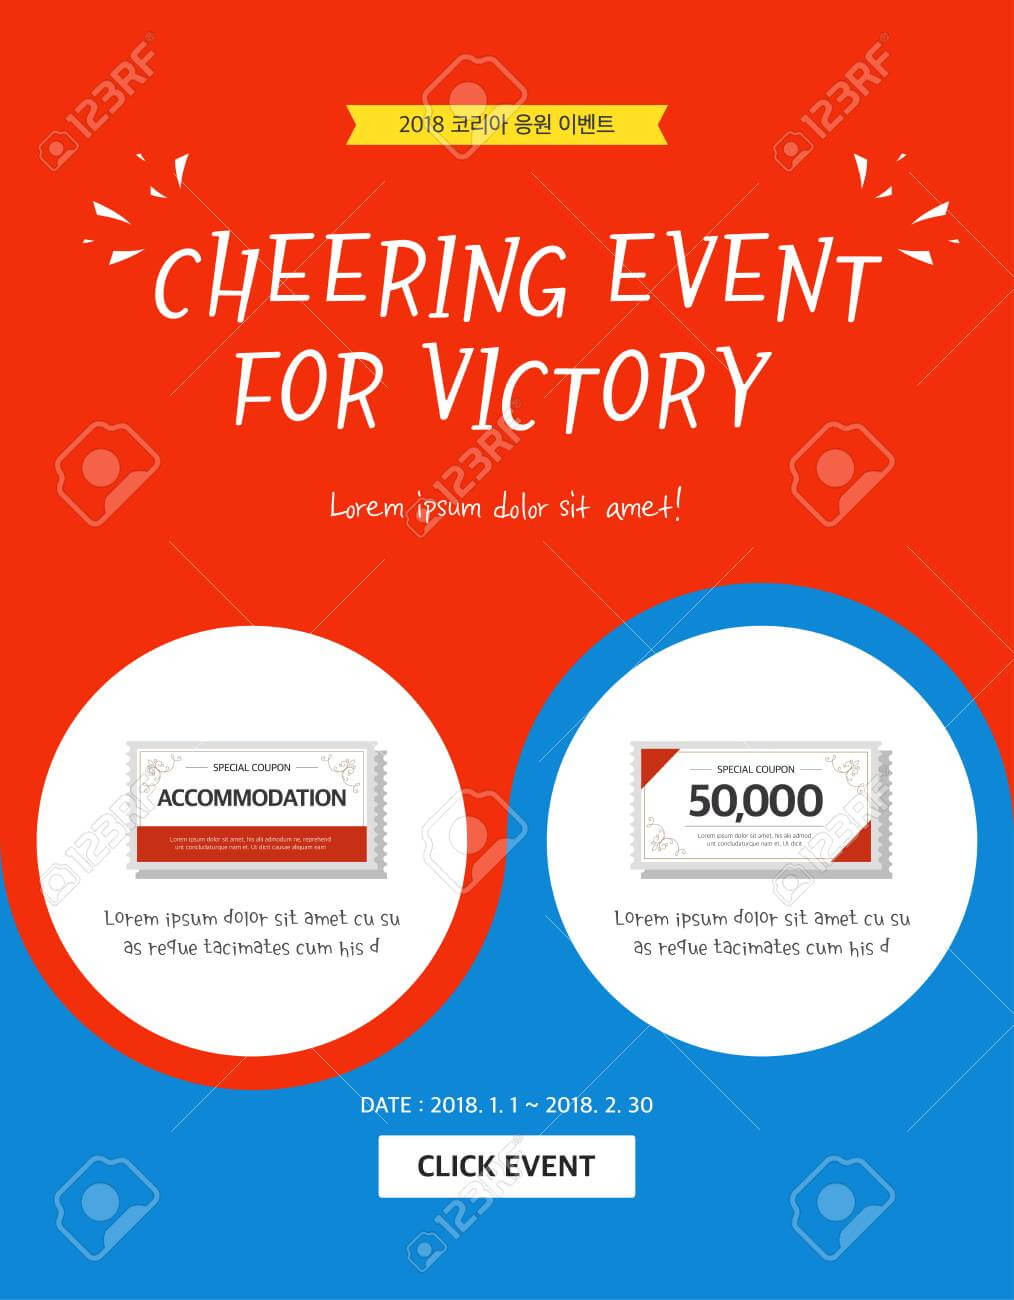 Event Banner Template – Cheering Event For Victory Inside Event Banner Template